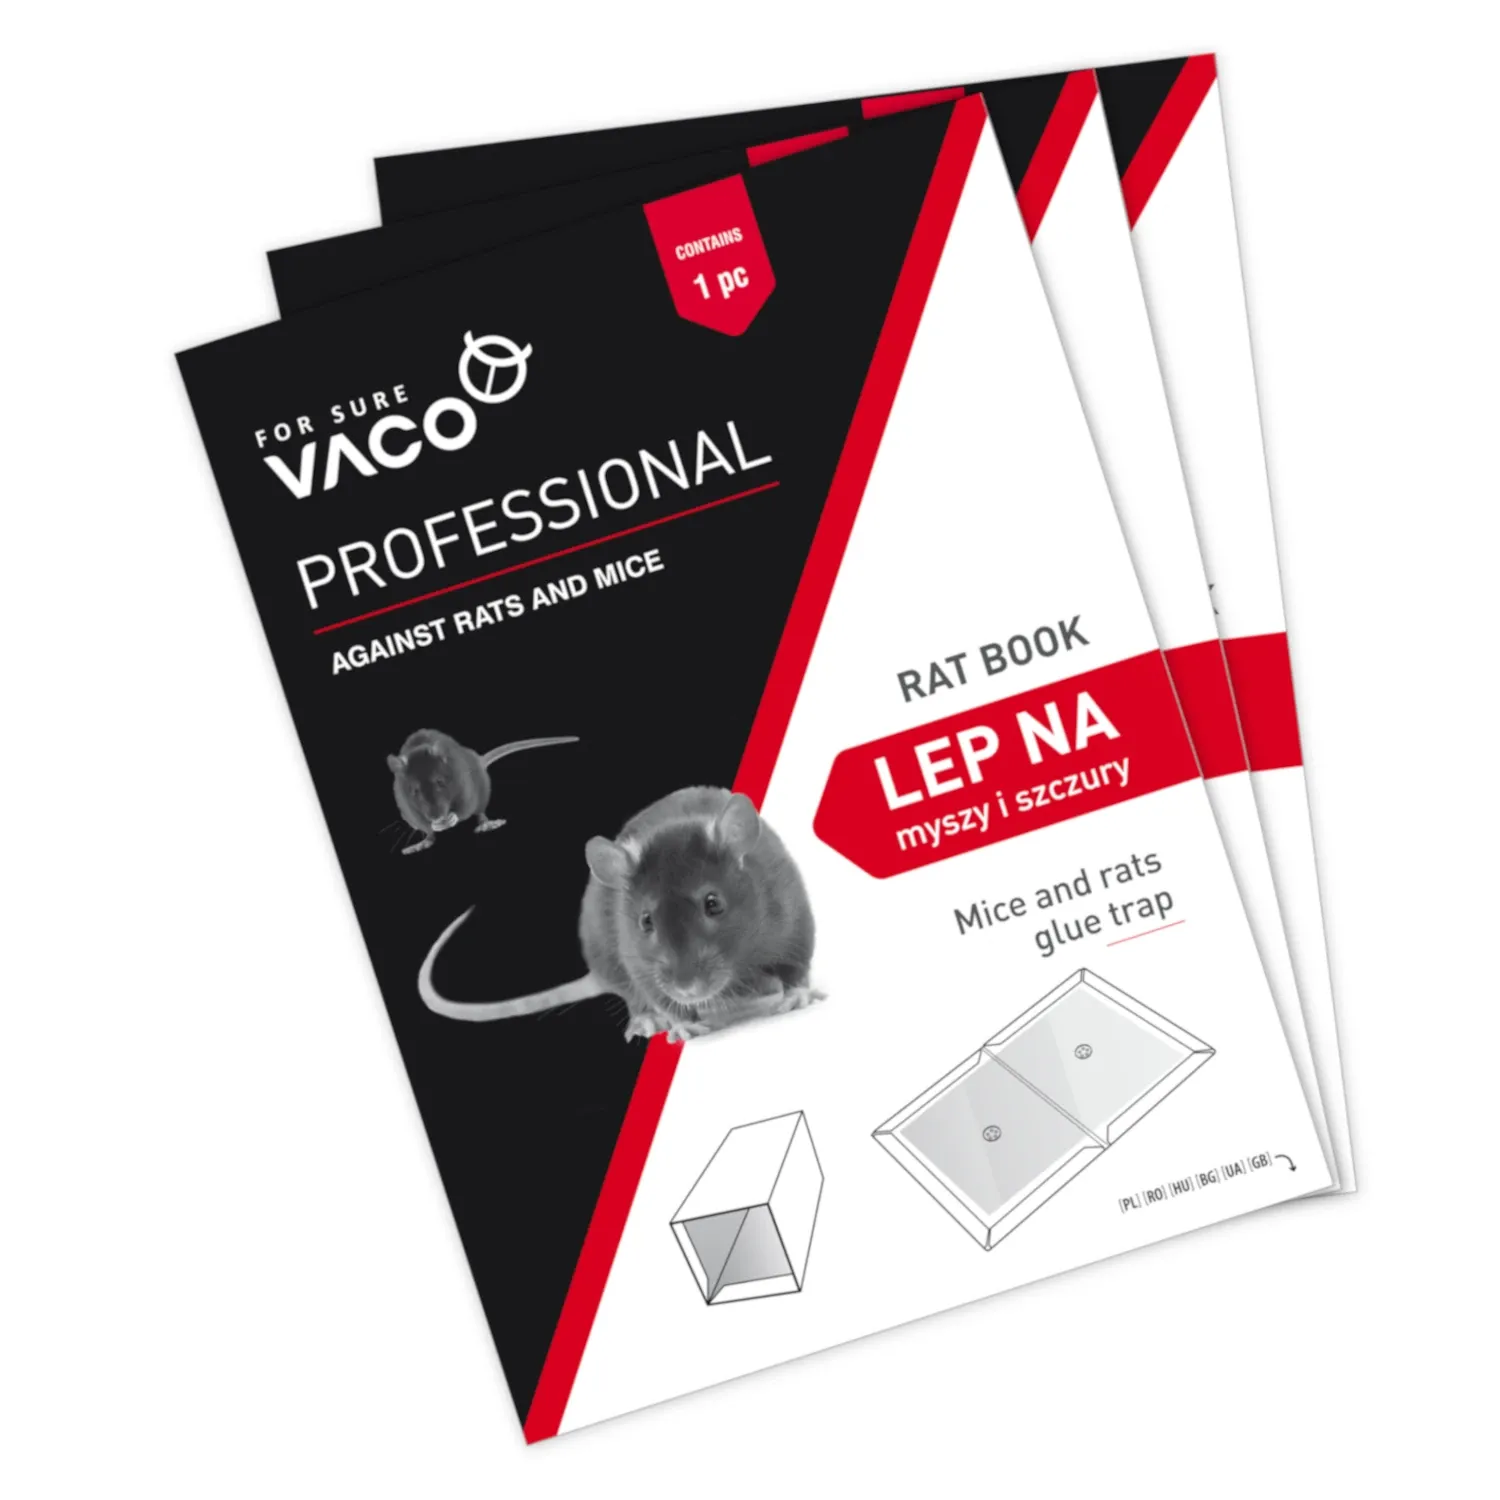 VACO PROFESSIONAL RATBOOK – TRAP FOR MICE AND RATS